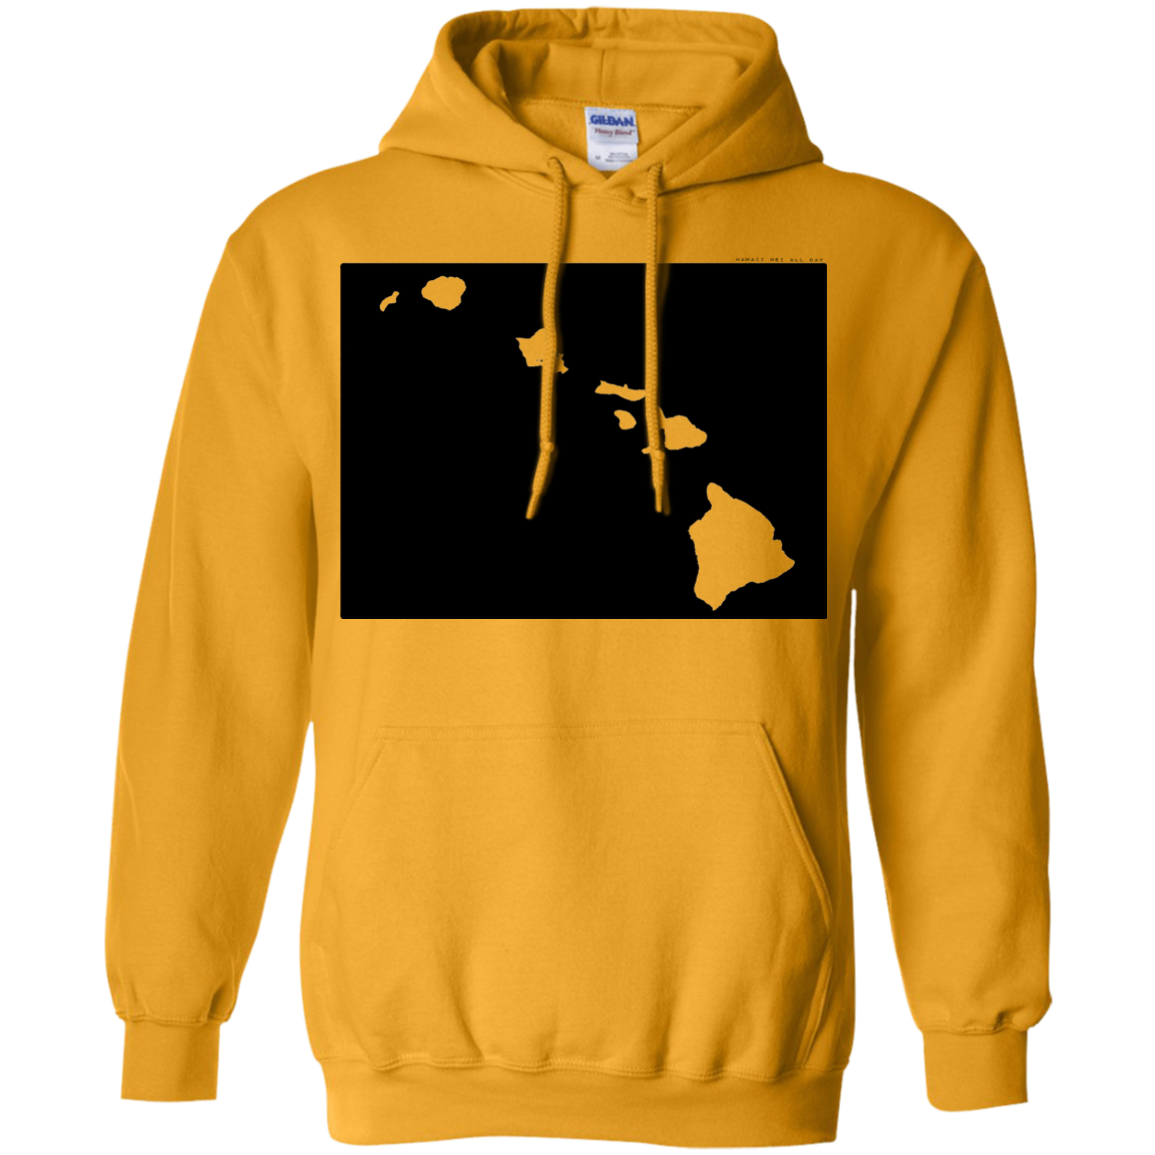 Living in Colorado with Hawaii Roots Pullover Hoodie, Sweatshirts, Hawaii Nei All Day